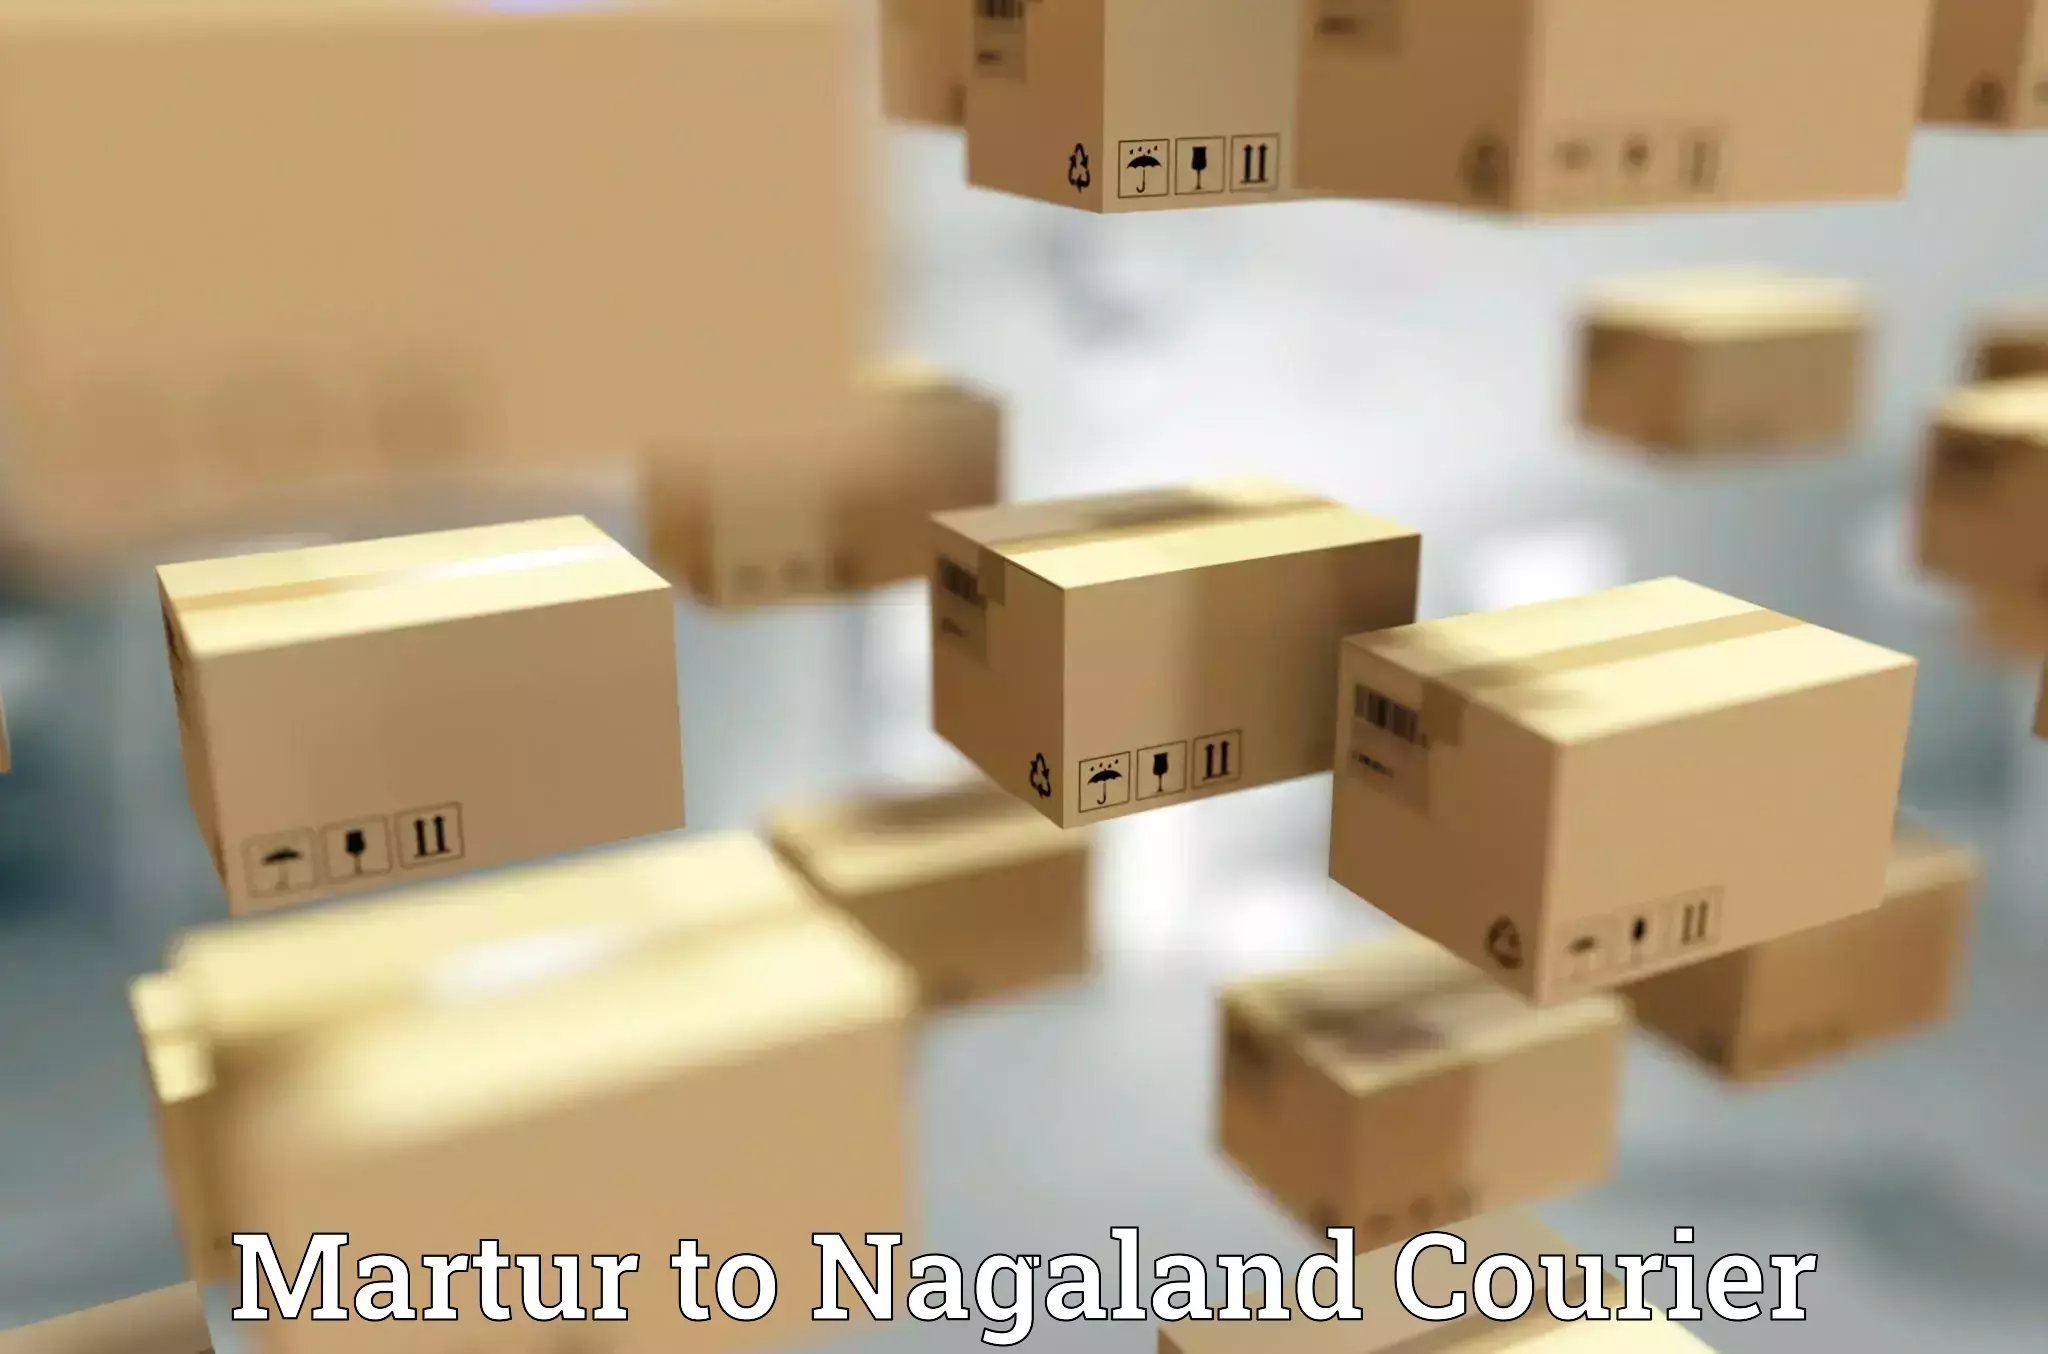 Fast delivery service Martur to Nagaland